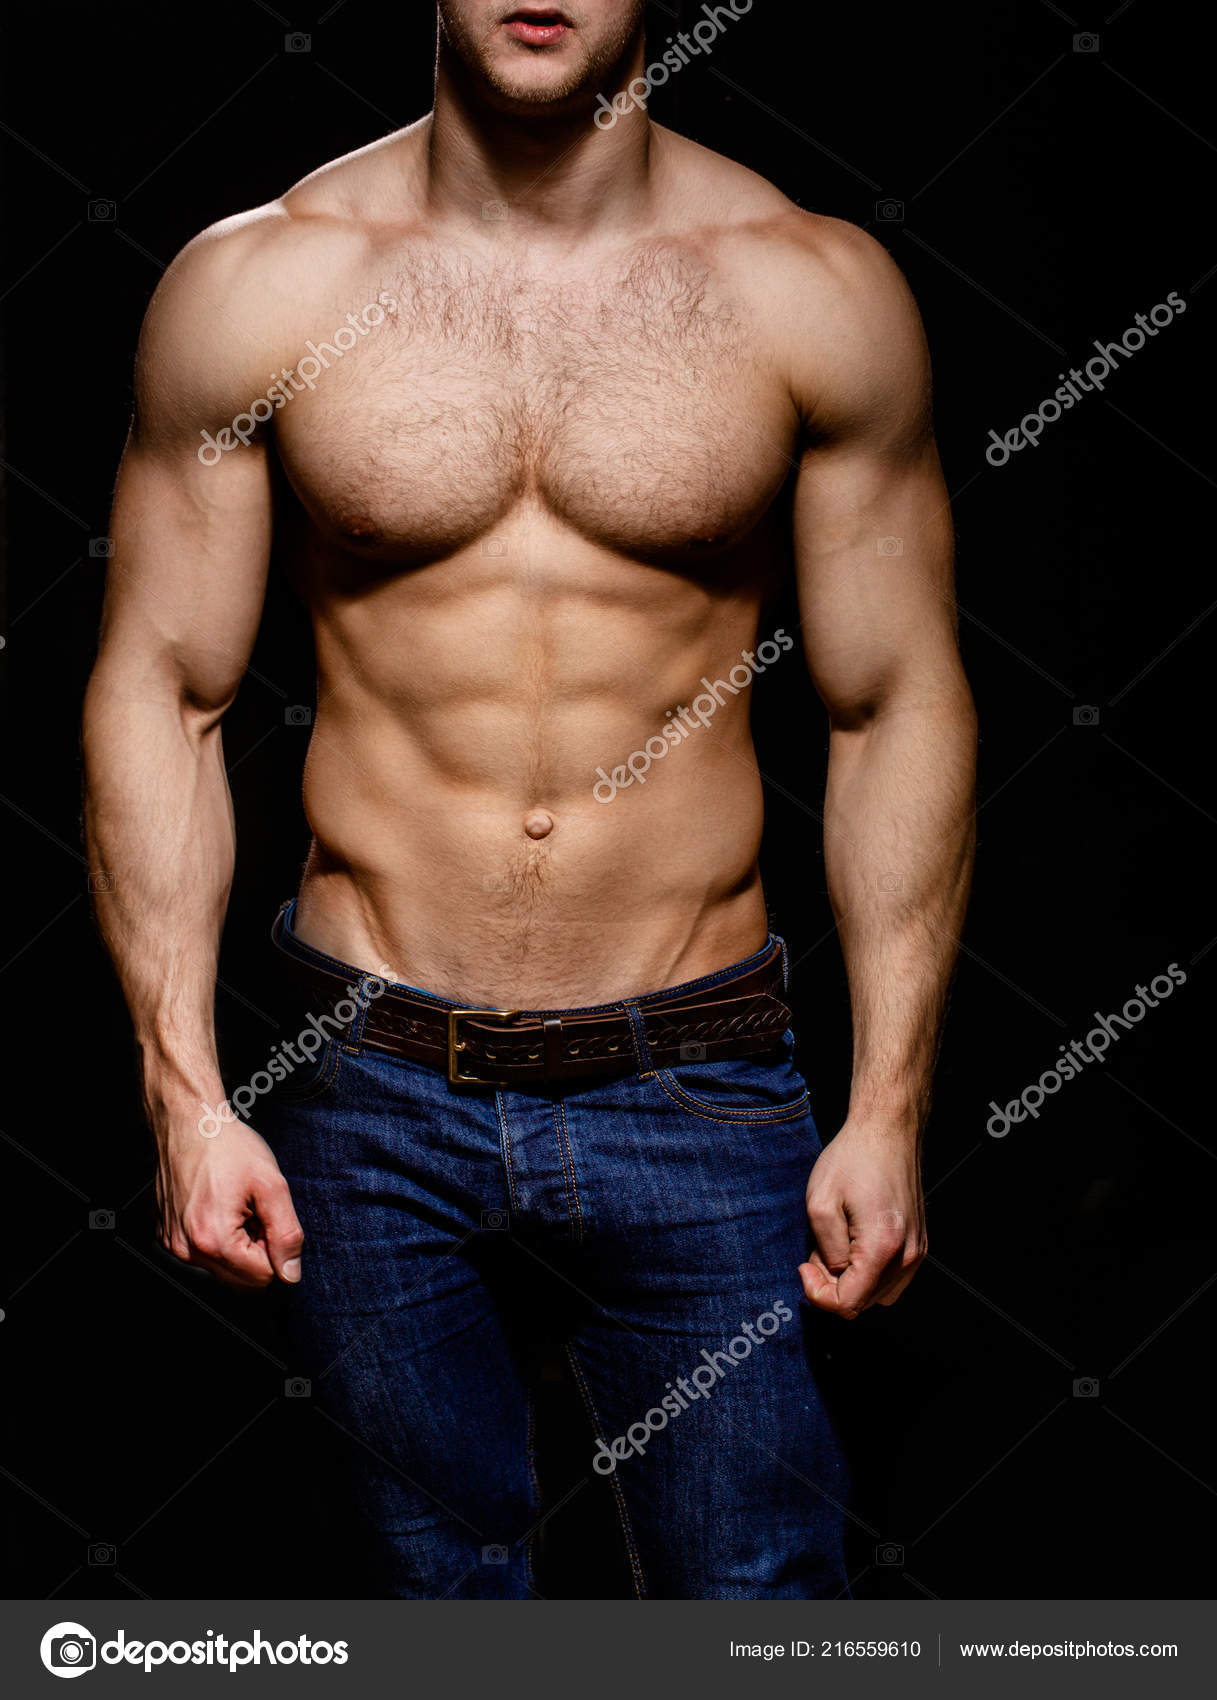 Sexy body man. Handsome nude man. chest muscles, Six pack, ab